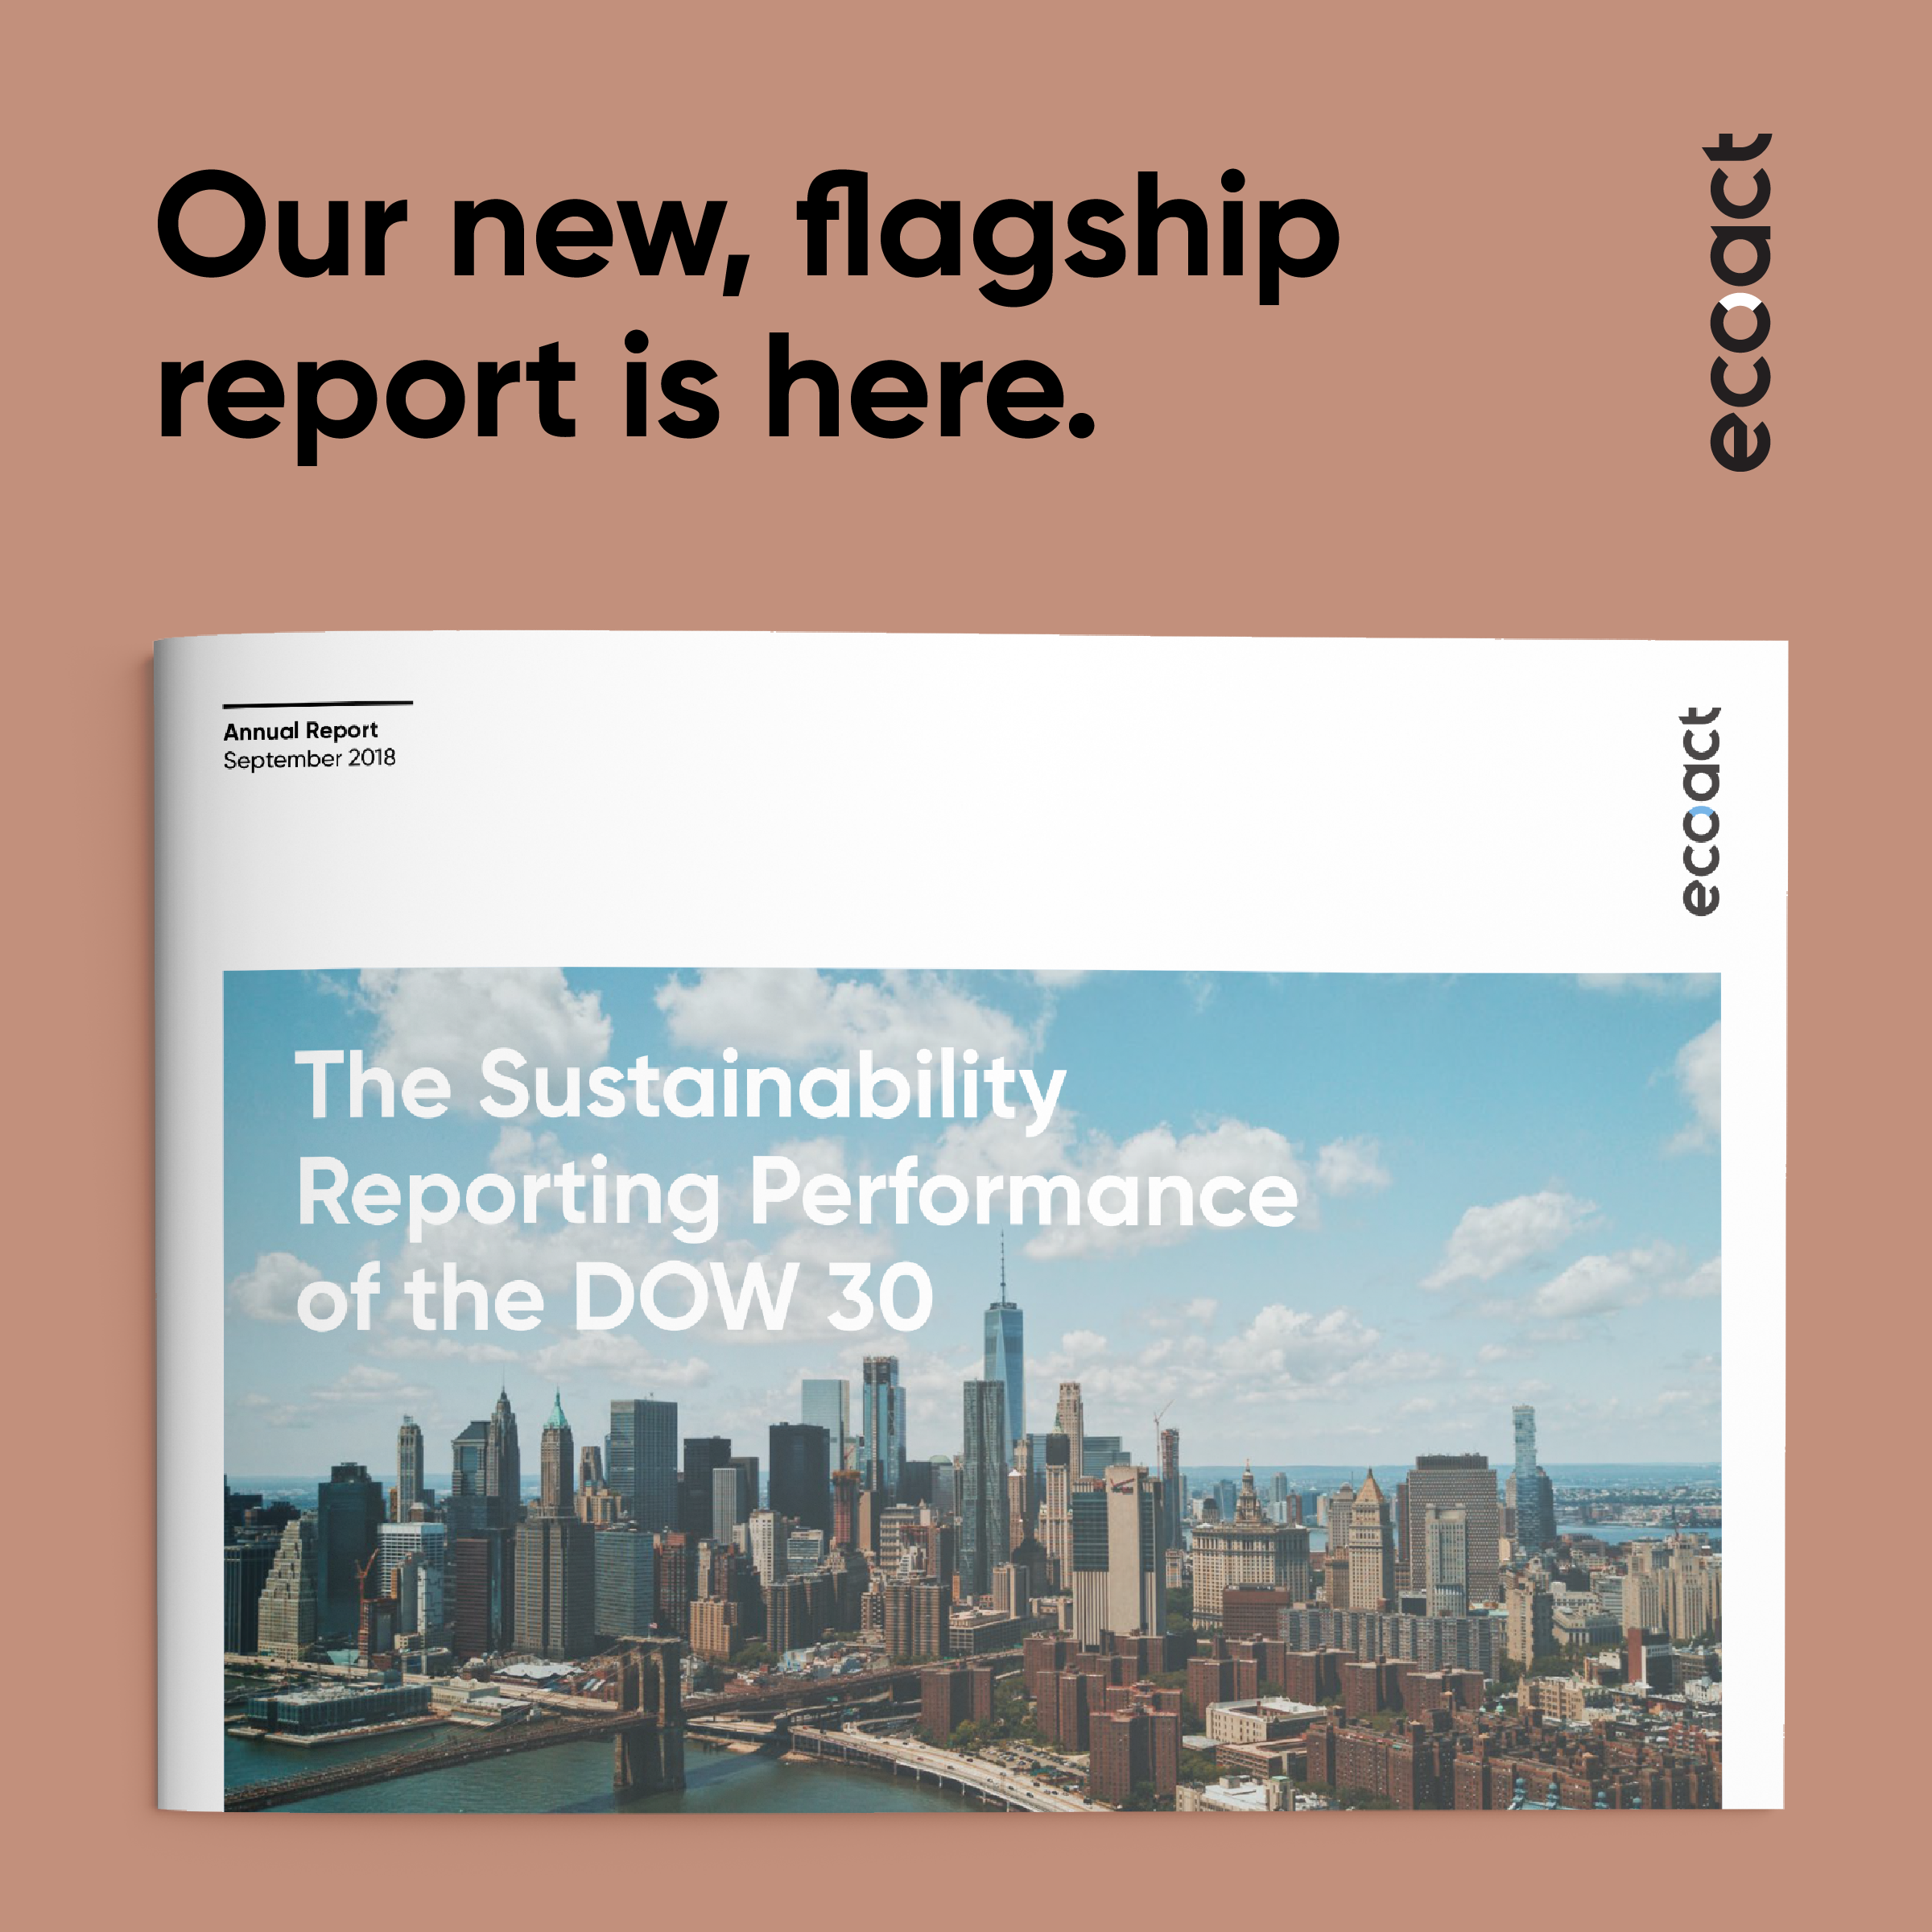 The Sustainability Reporting Performance of the DOW 30 | 20182400 x 2400